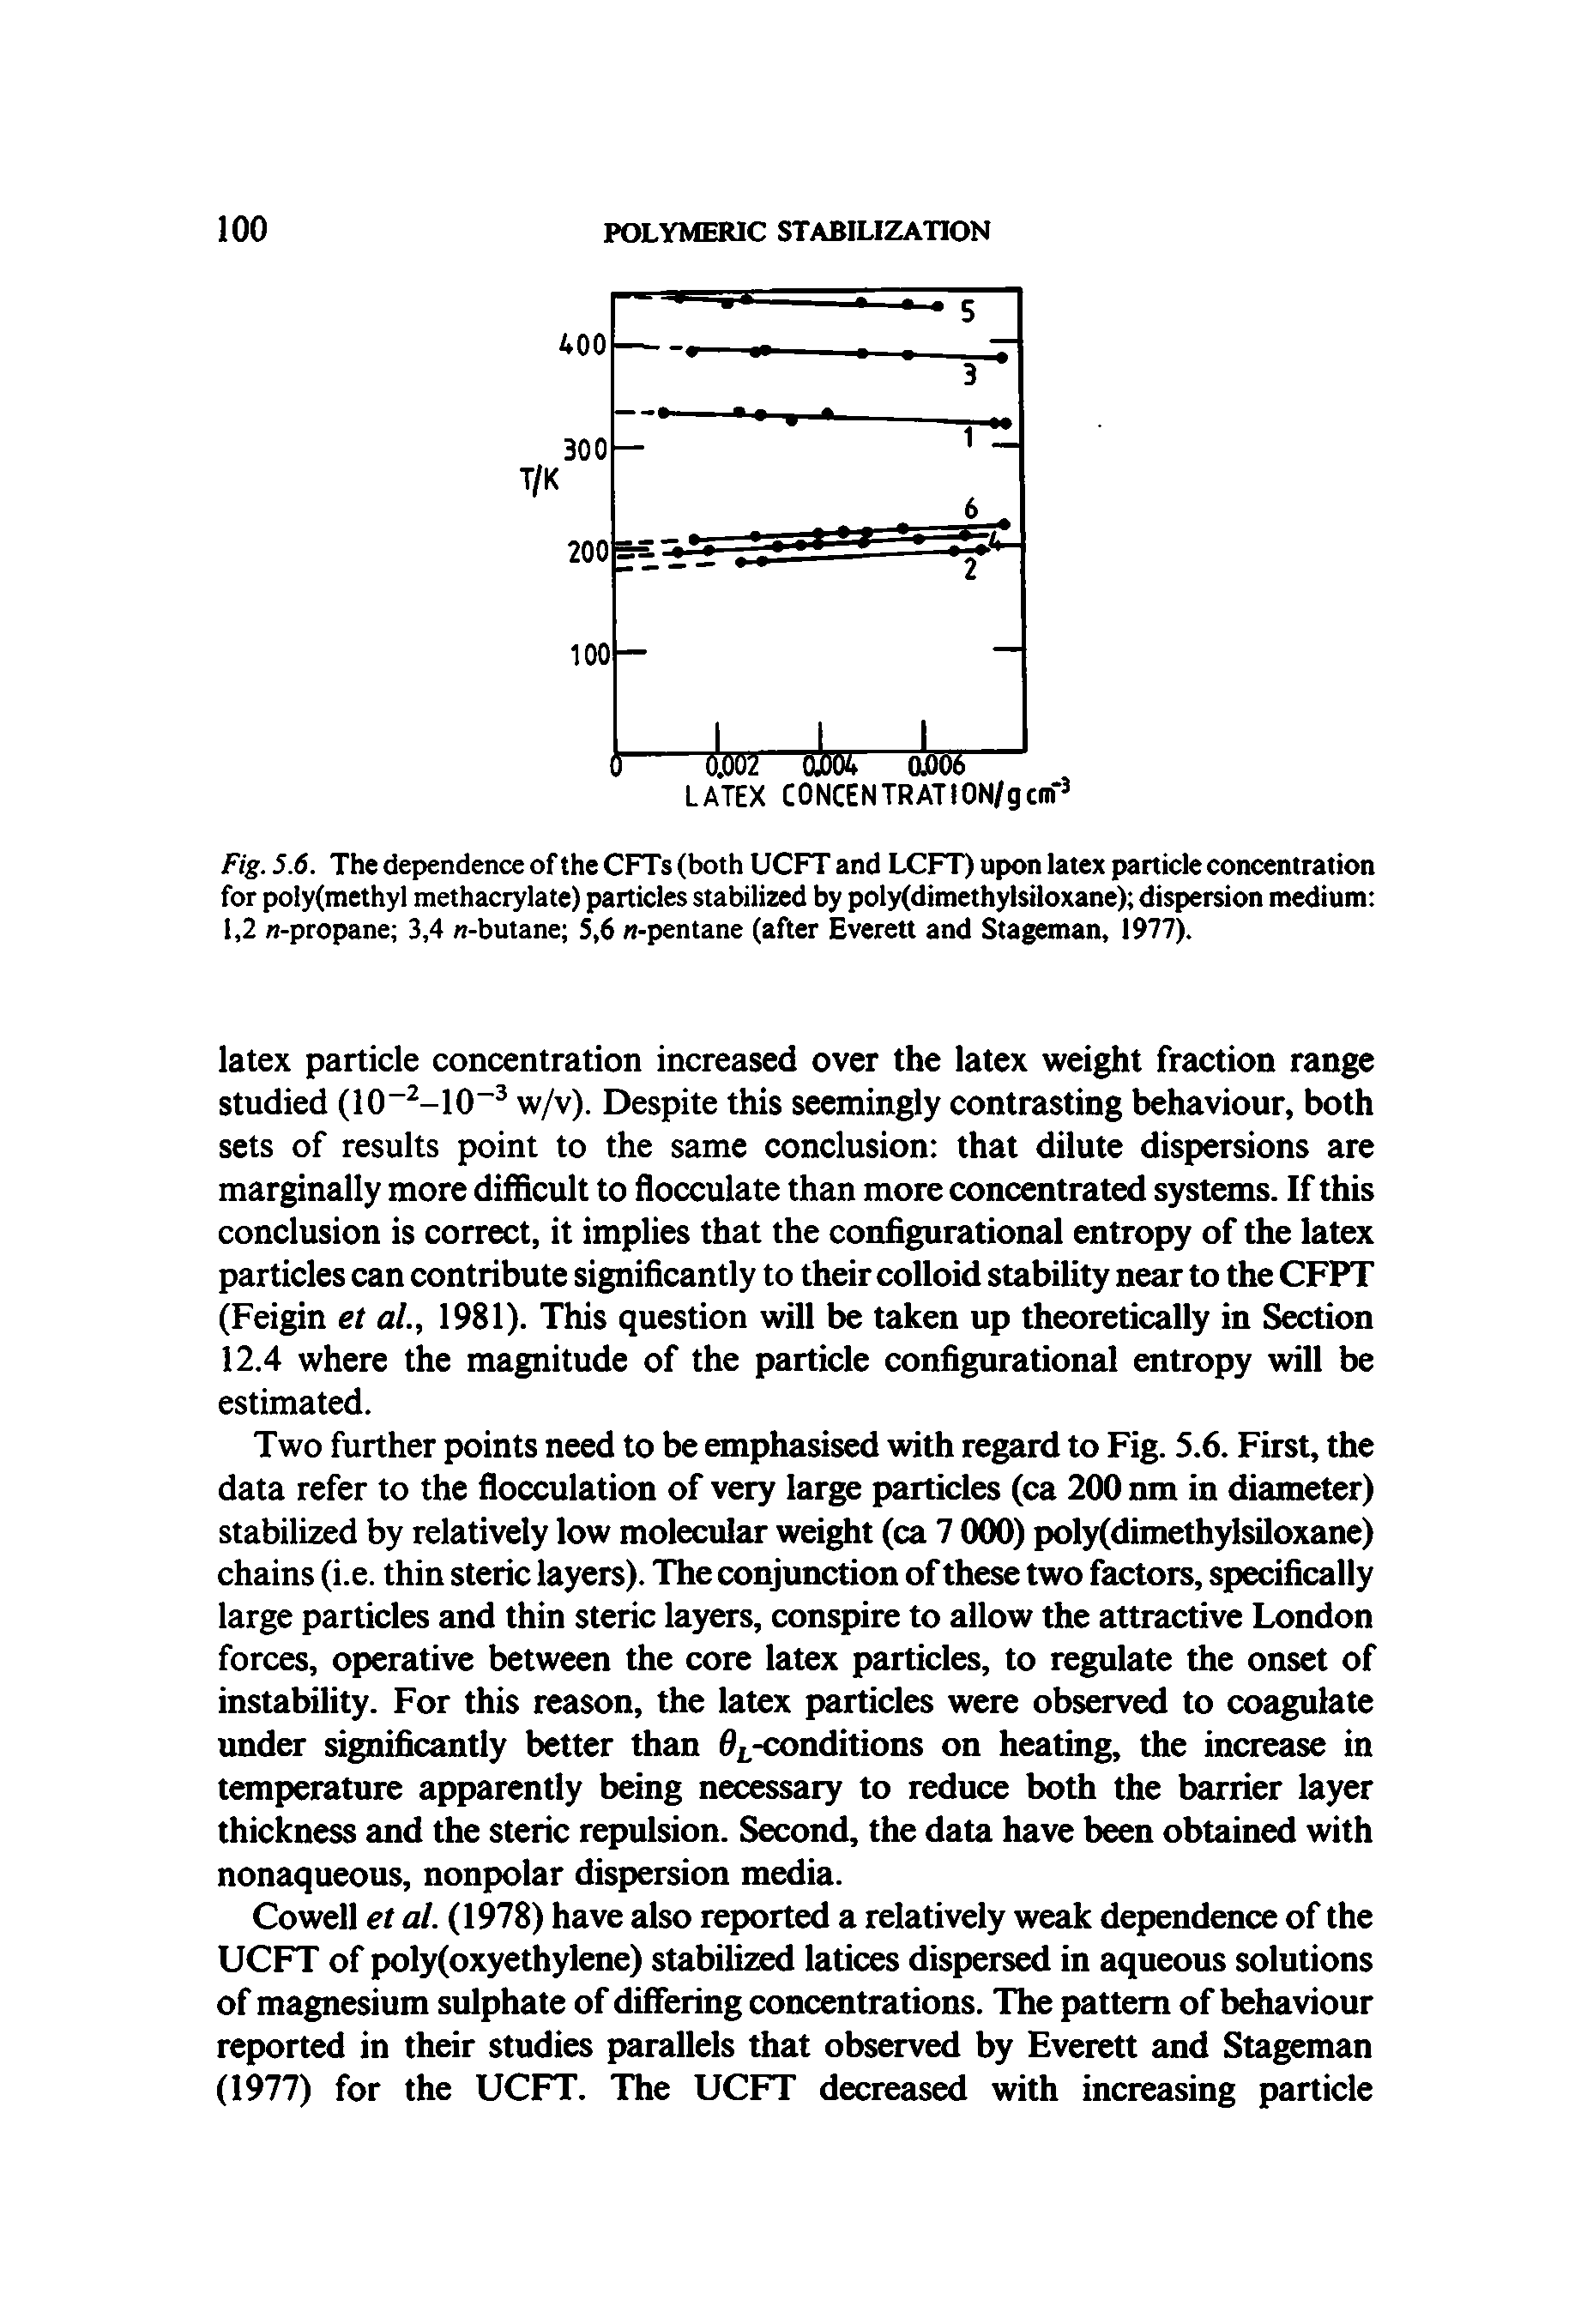 Fig. 5.6. The dependence of the CFTs (both UCFT and LCFT) upon latex particle concentration for poly(methyl methacrylate) particles stabilized by poly(dimethylsiloxane) dispersion medium 1,2 n-propane 3,4 n-butane 5,6 -pentane (after Everett and Stageman, 1977).